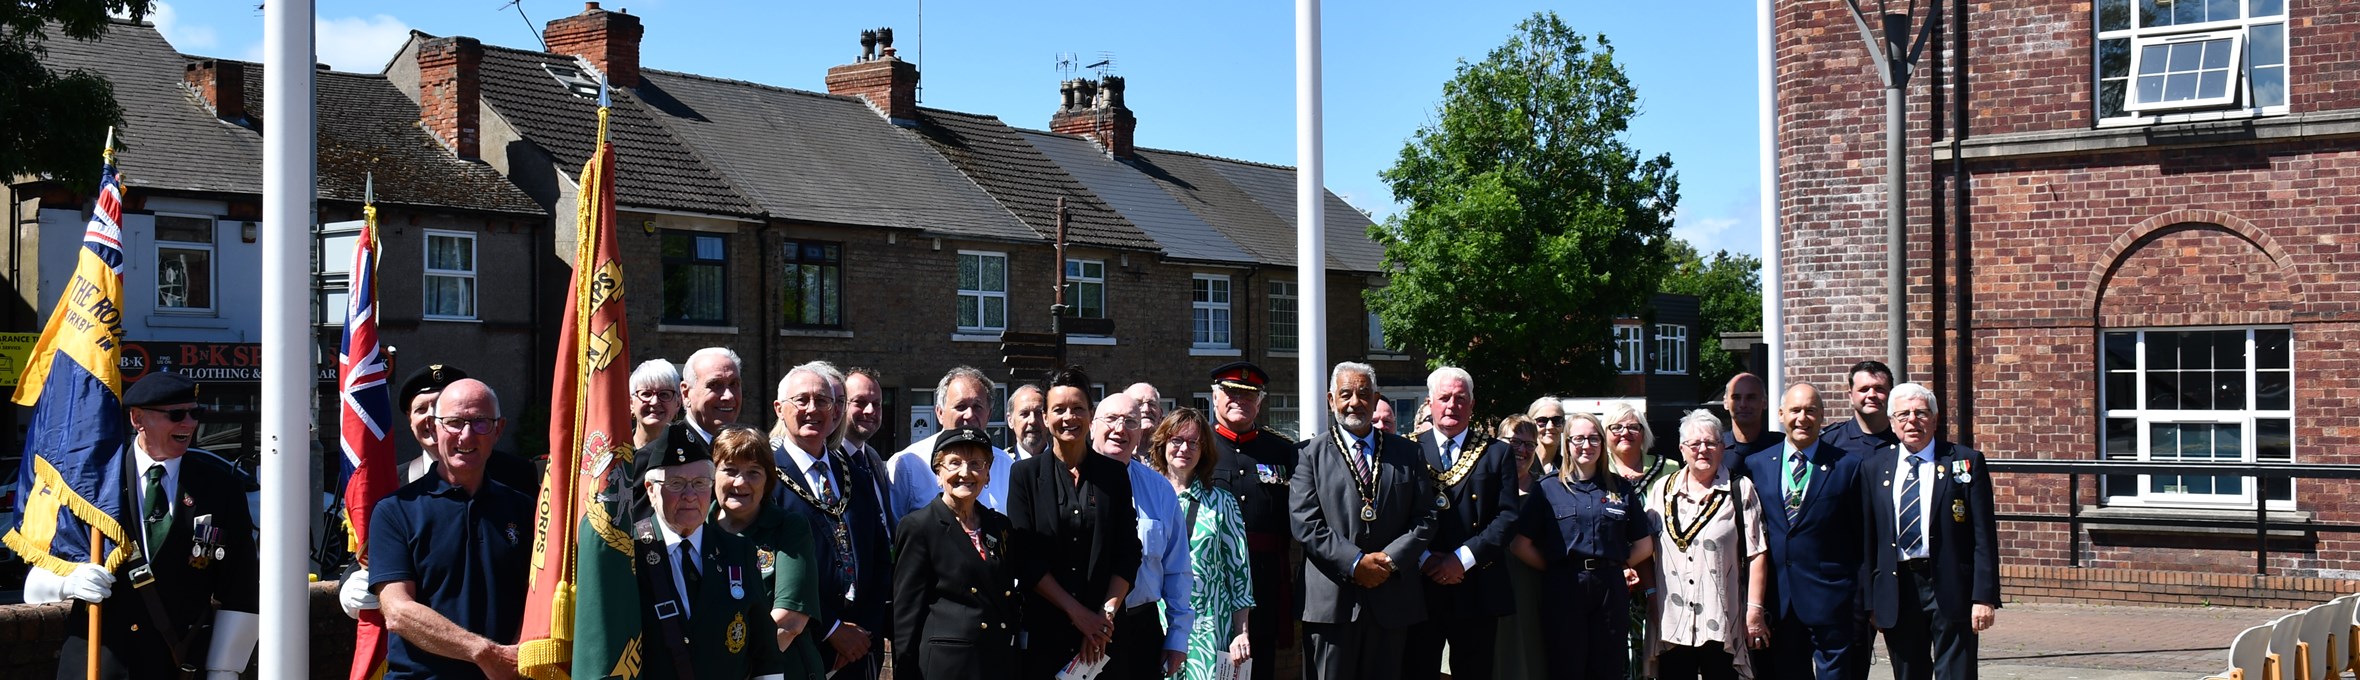 The Armed Forces Day flag is raised